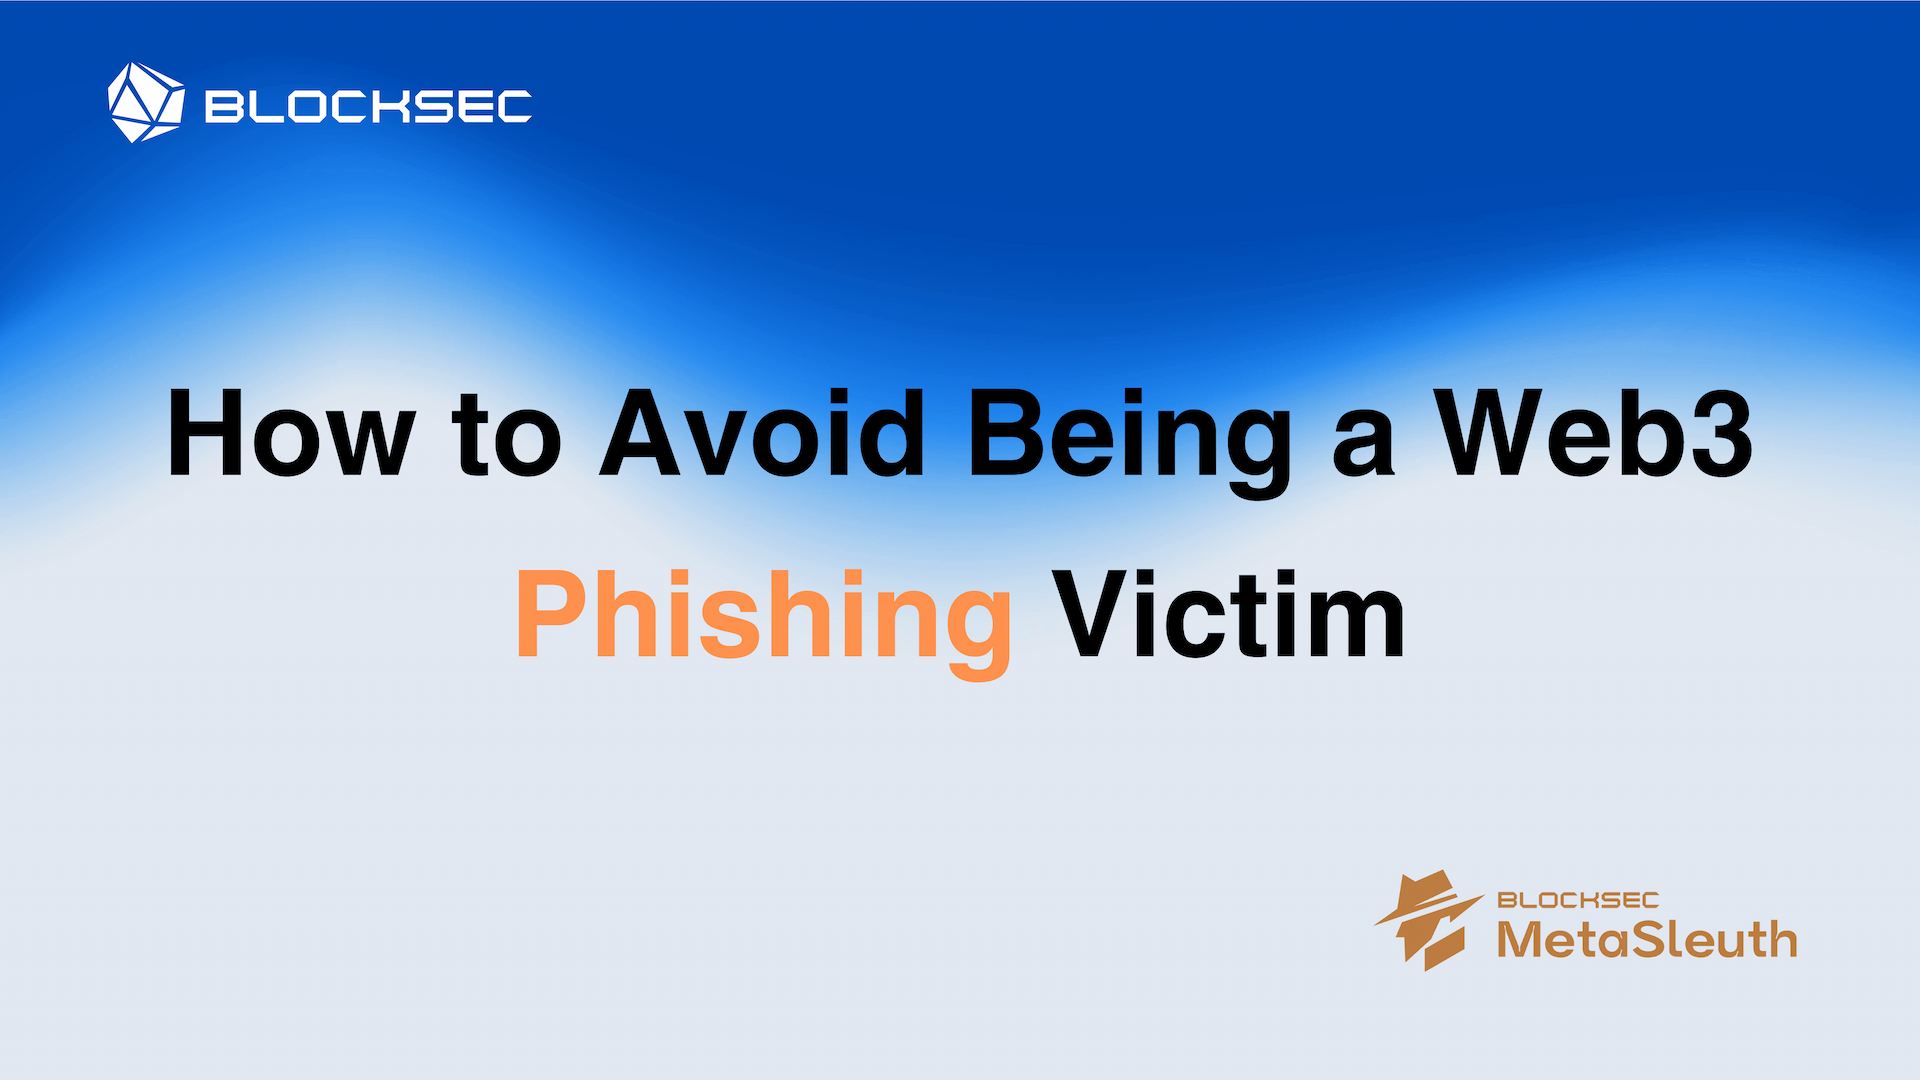 How to Avoid Being a Web3 Phishing Victim